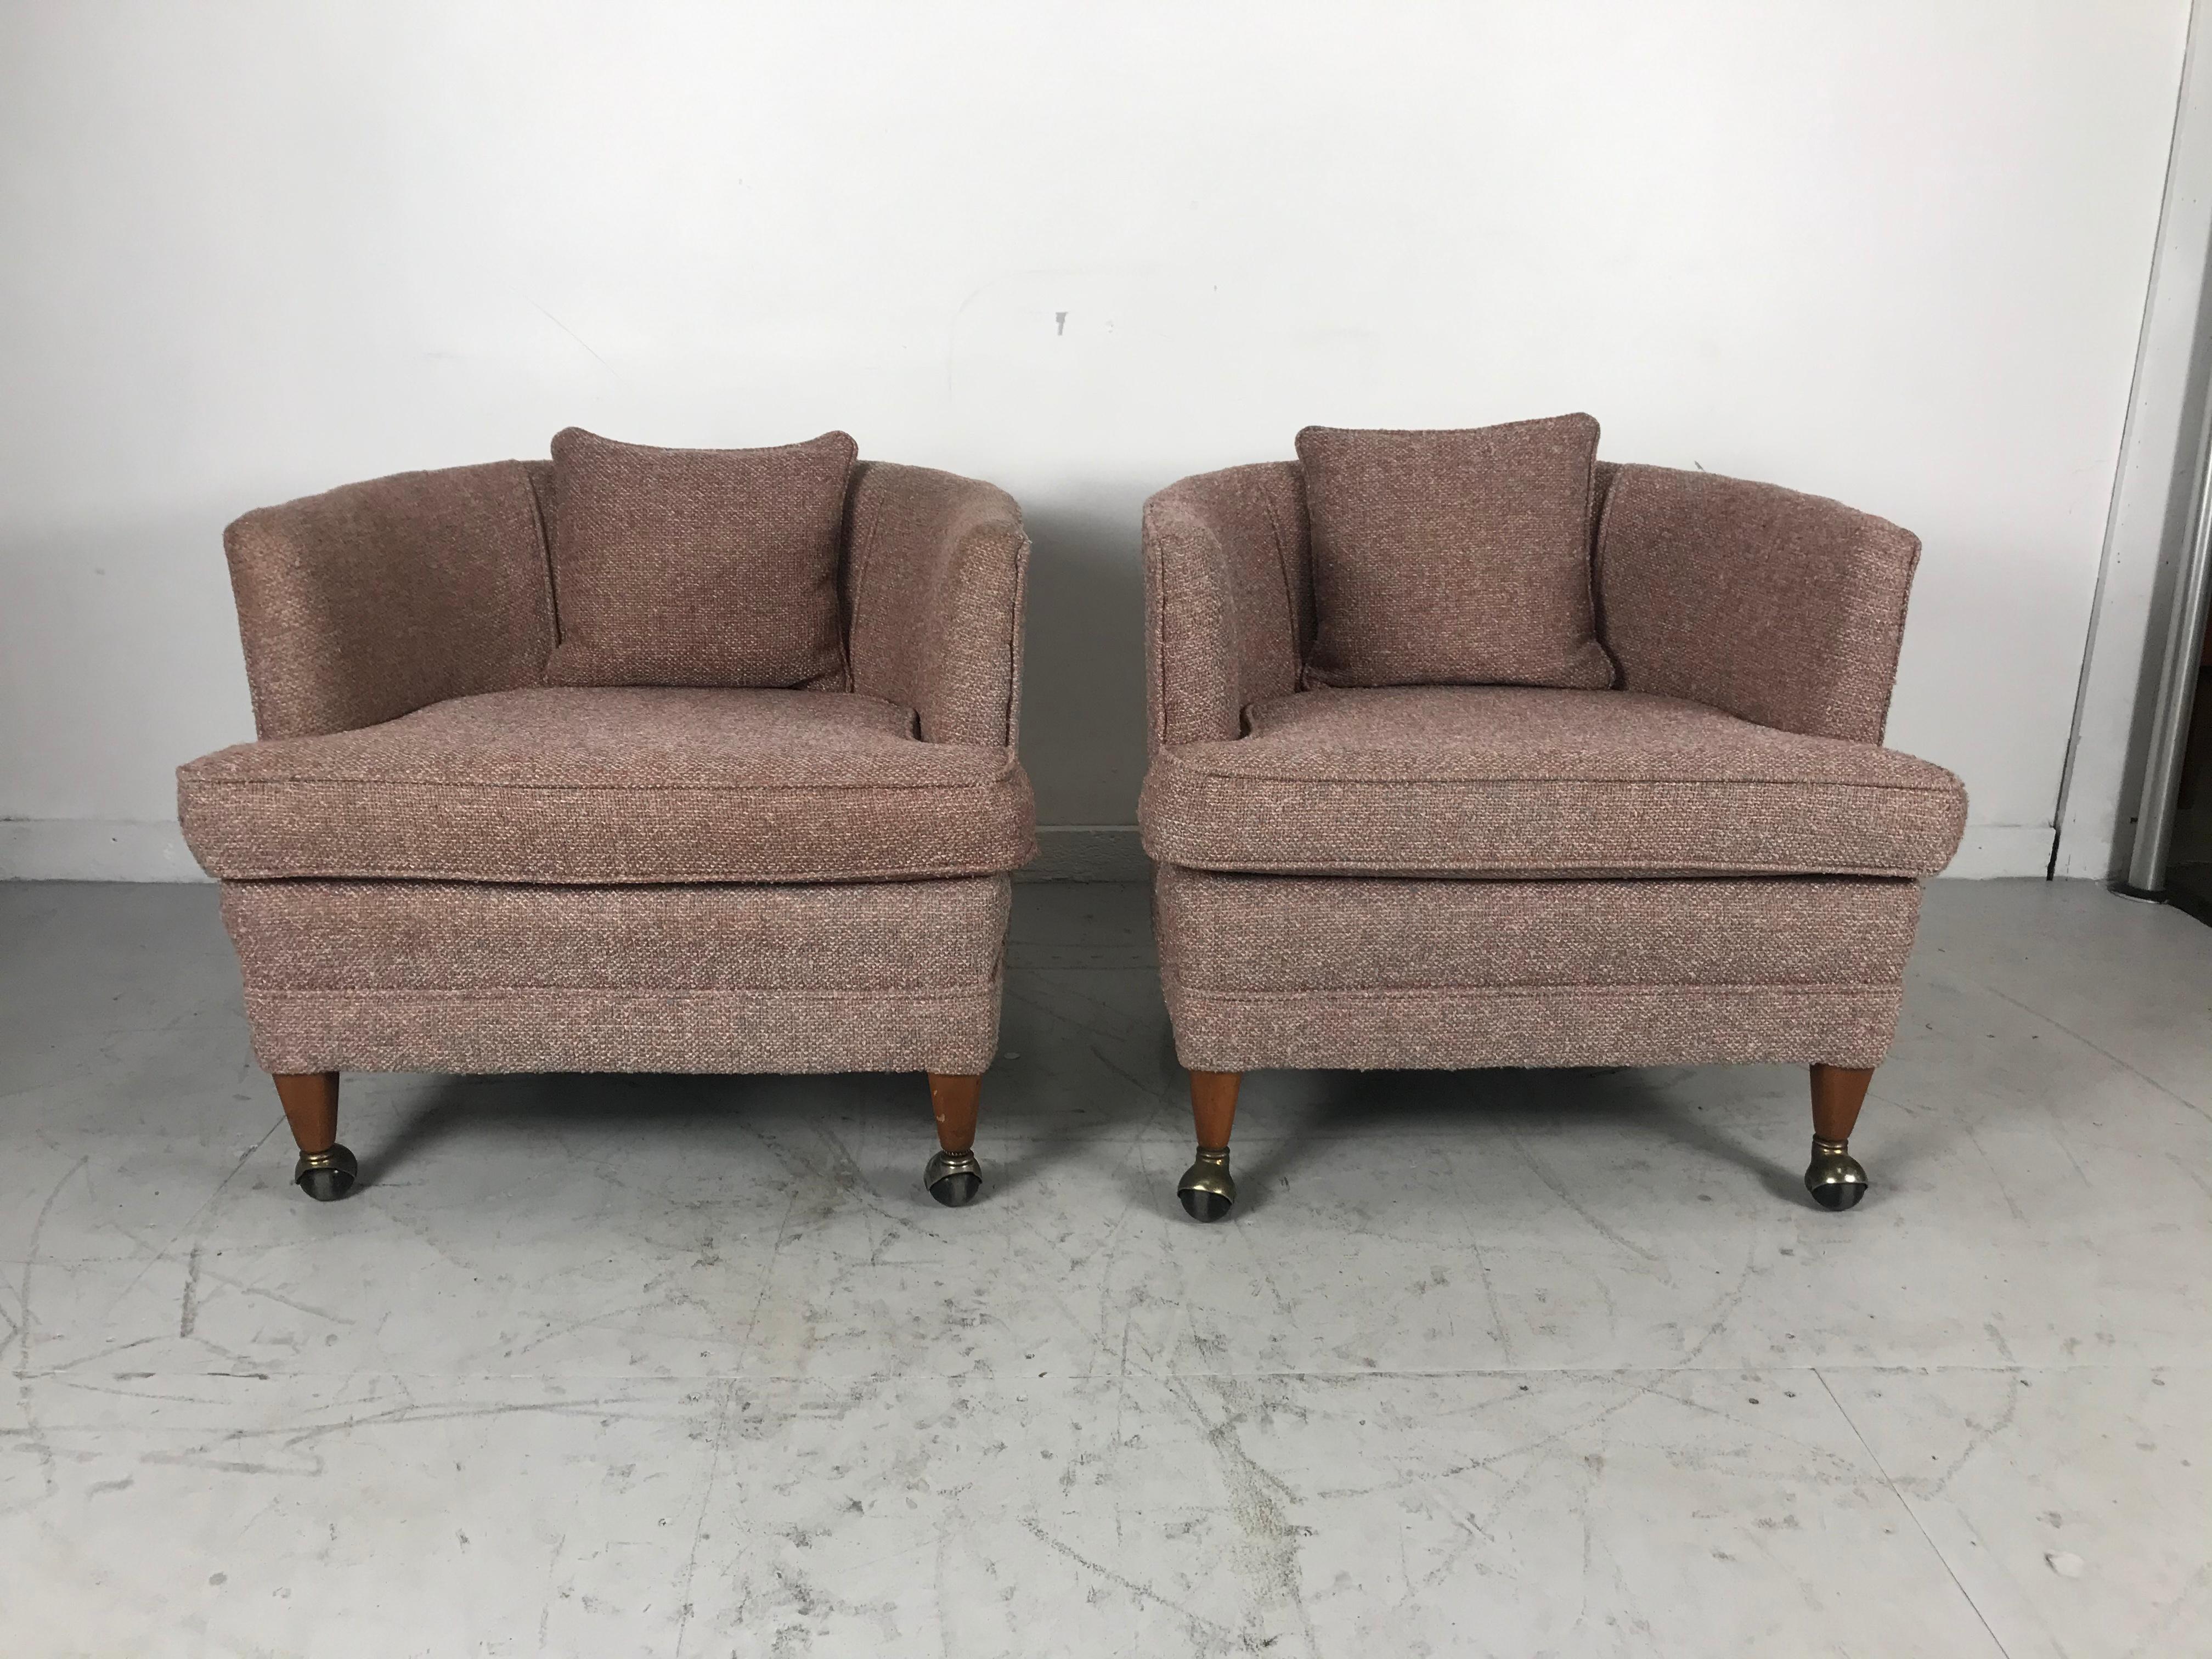 Classic pair of modernist tub chairs on Castors. Manufactured by Tomlinson Furniture Co. Nice pair lounge chairs, retains original fabric. Extremely comfortable.